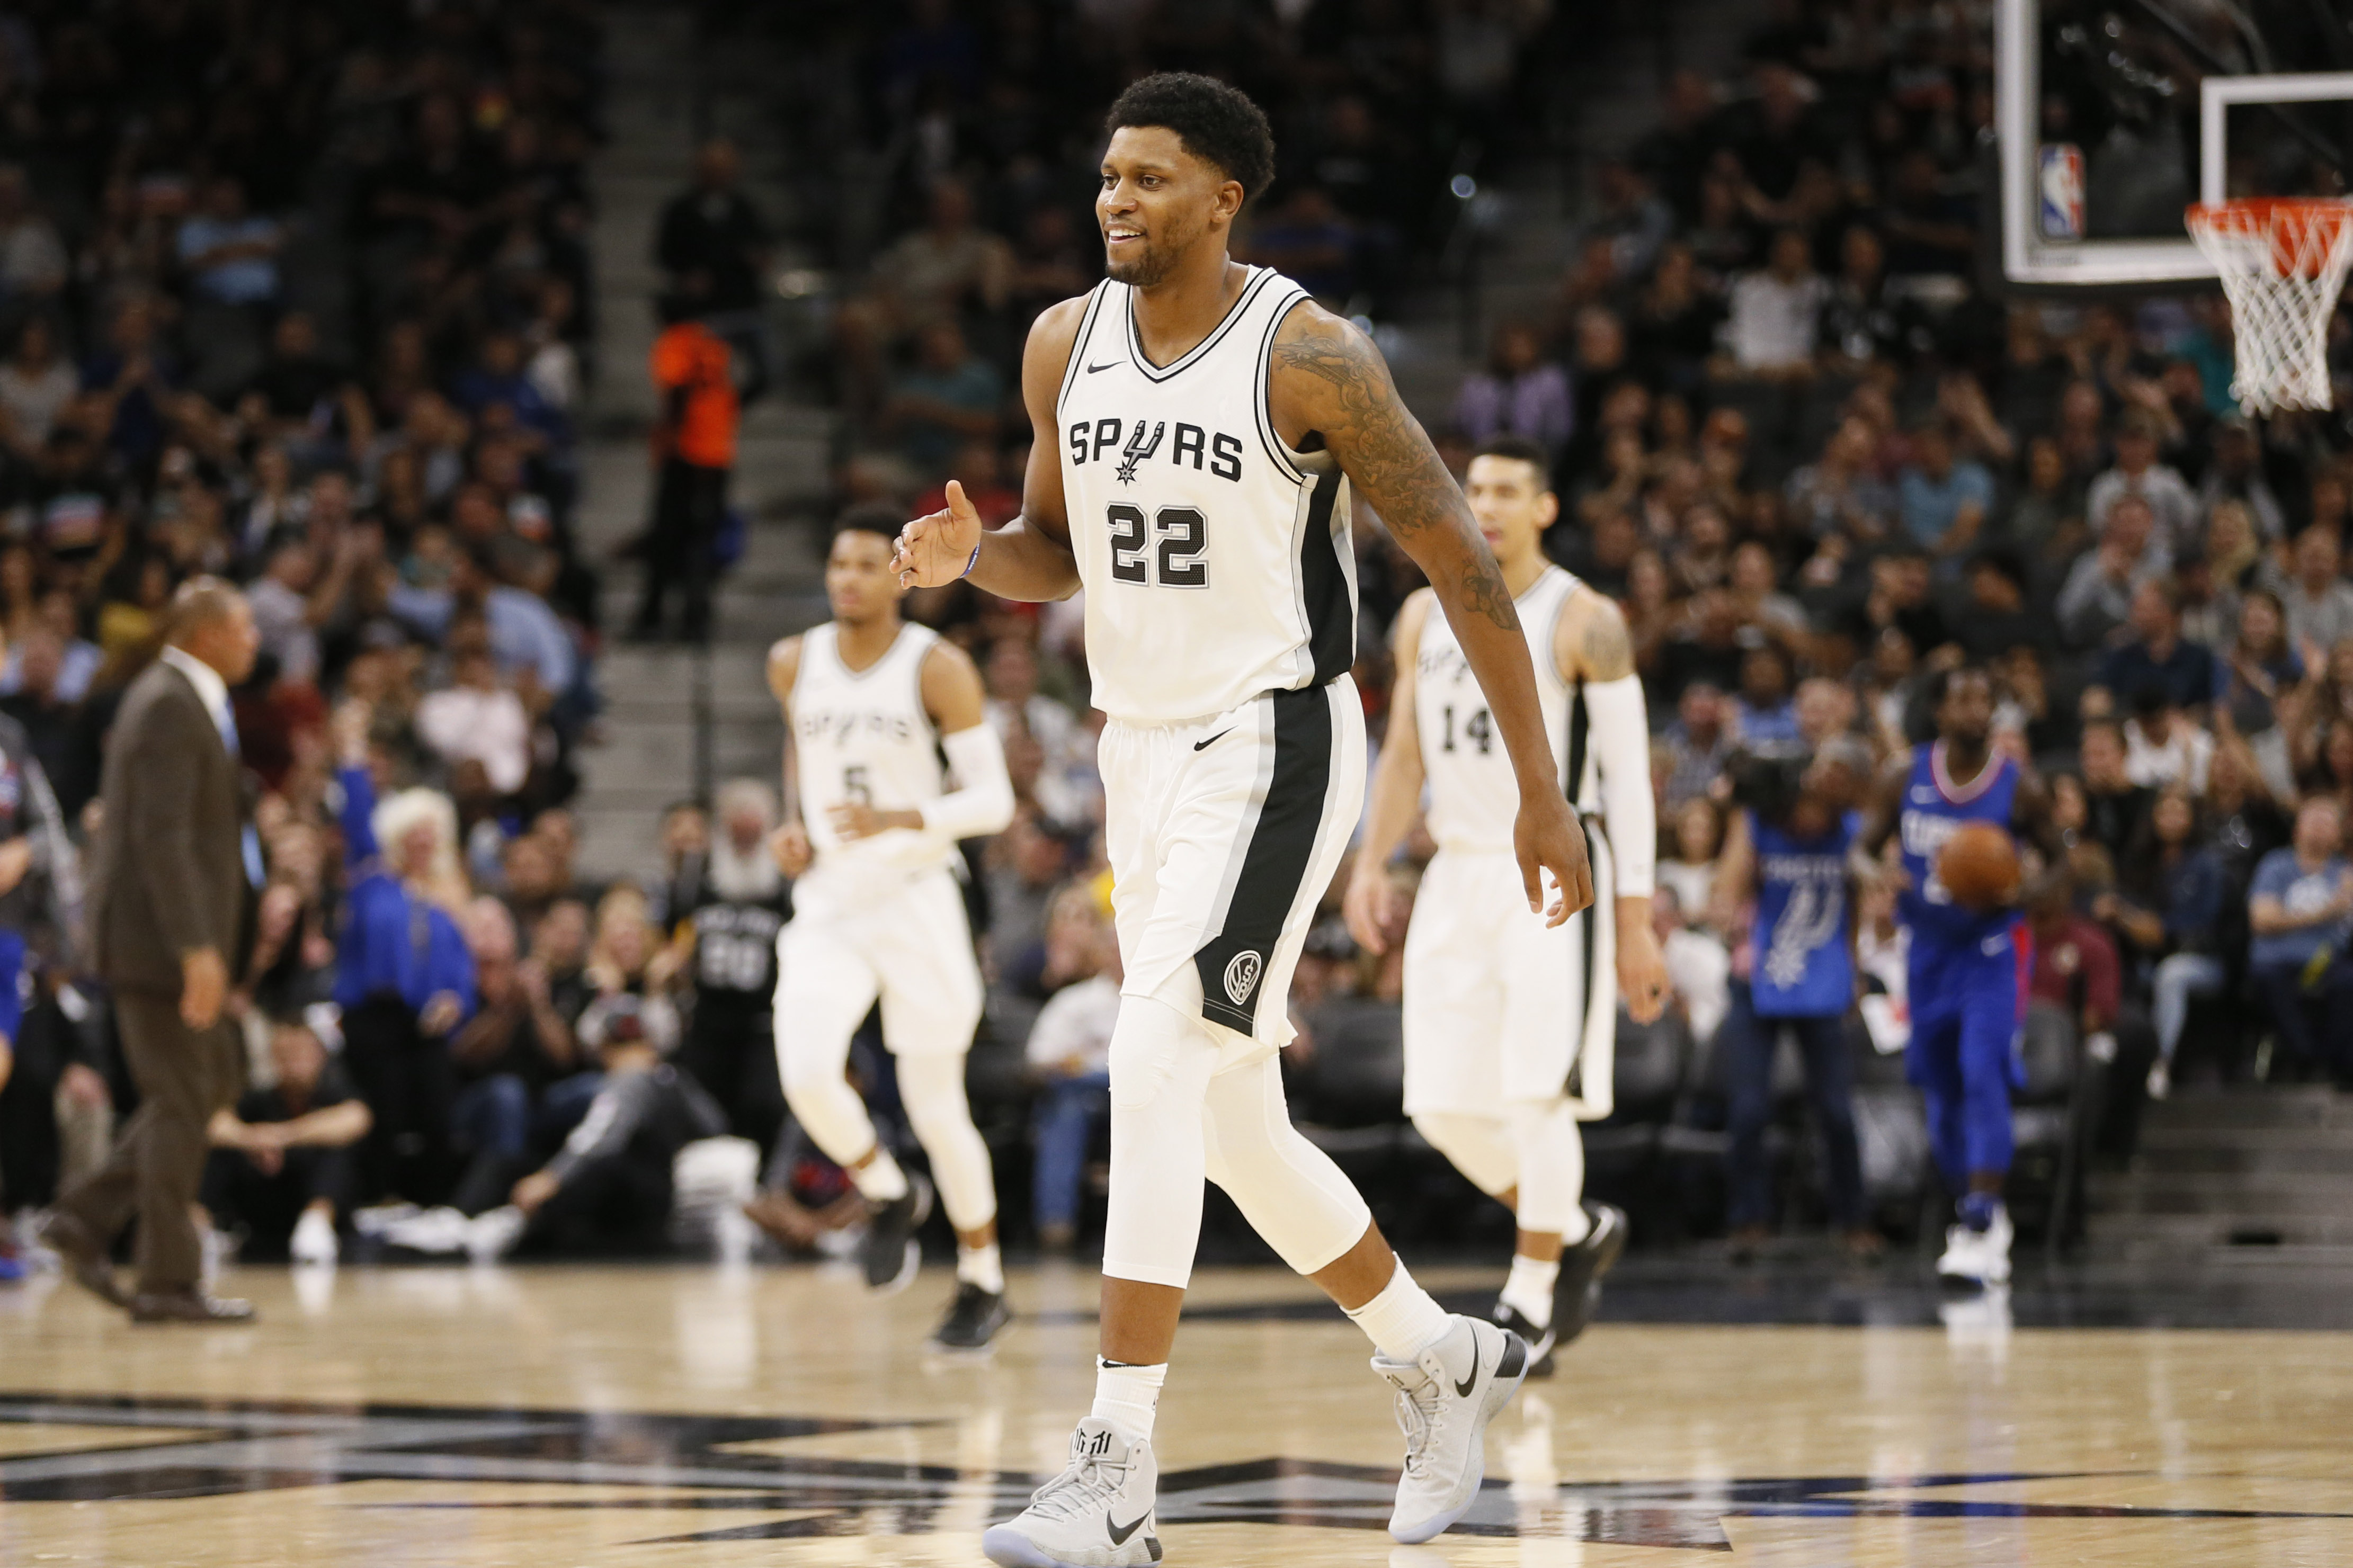 Quick turnarounds for Spurs, Bulls